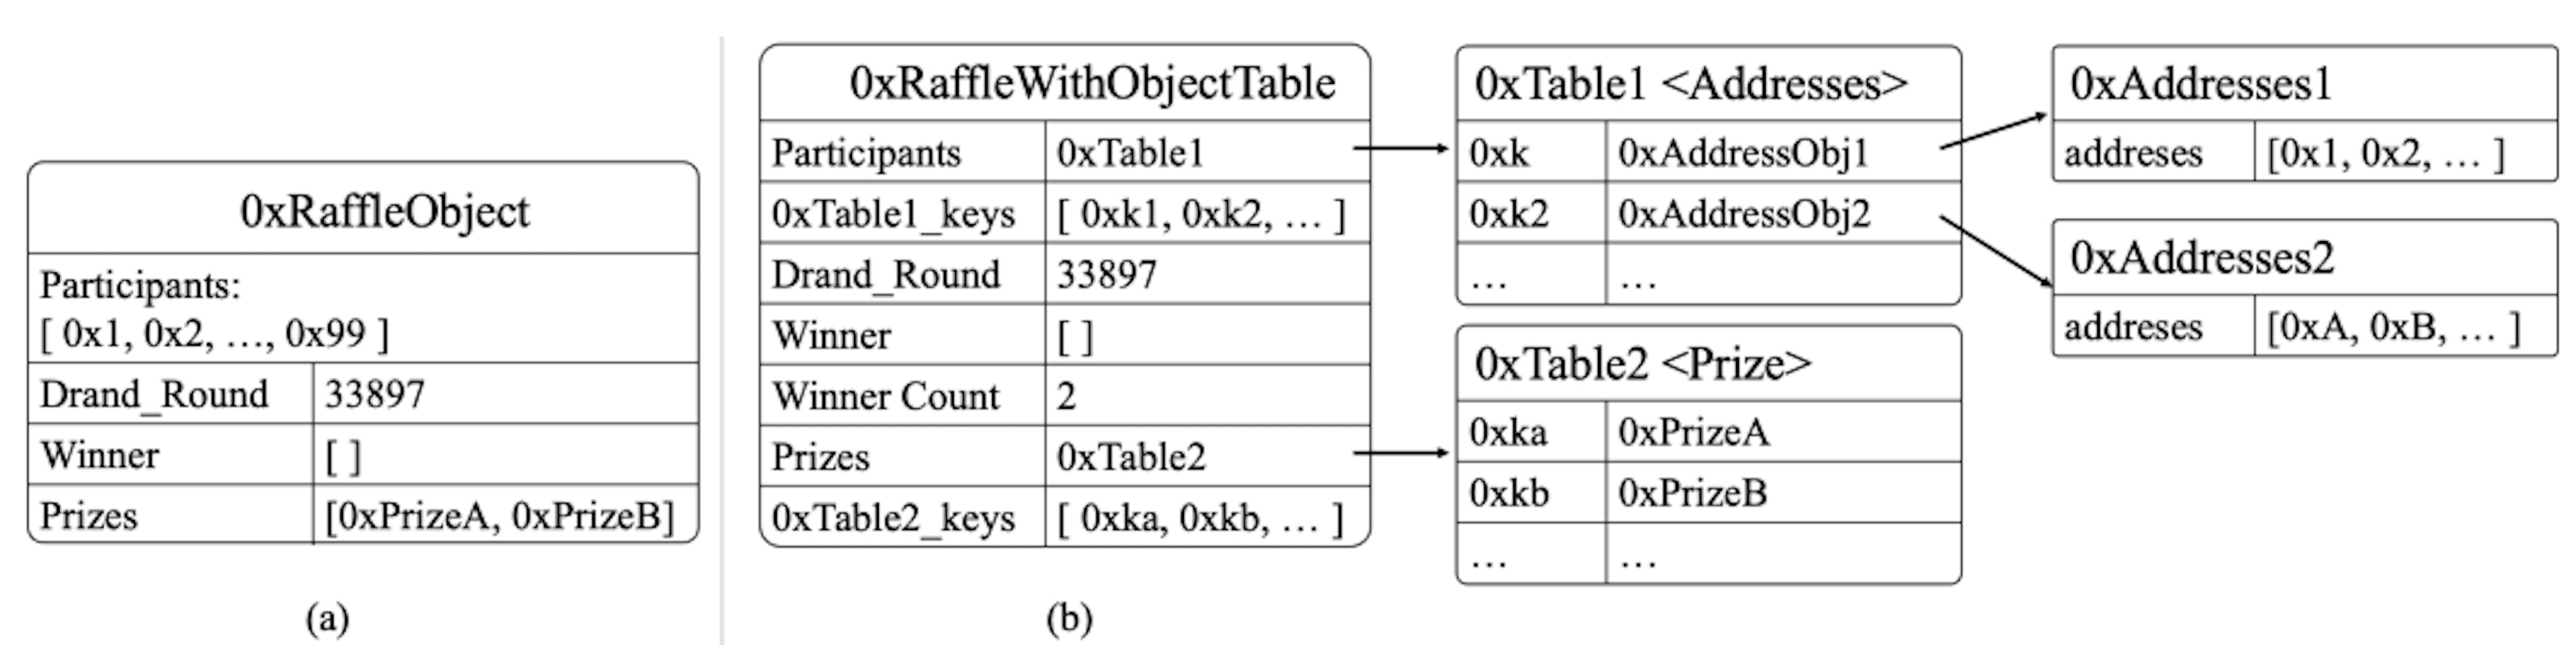 Figure 2: Comparison between two raffle designs: one without an object table (a) and the other with a 1-layer object table (b).The design without an object table (a) on the left can hold up to 7, 500 addresses, whereas the design with a 1-layer object table (b) on the right can accommodate 7, 500 2 addresses.